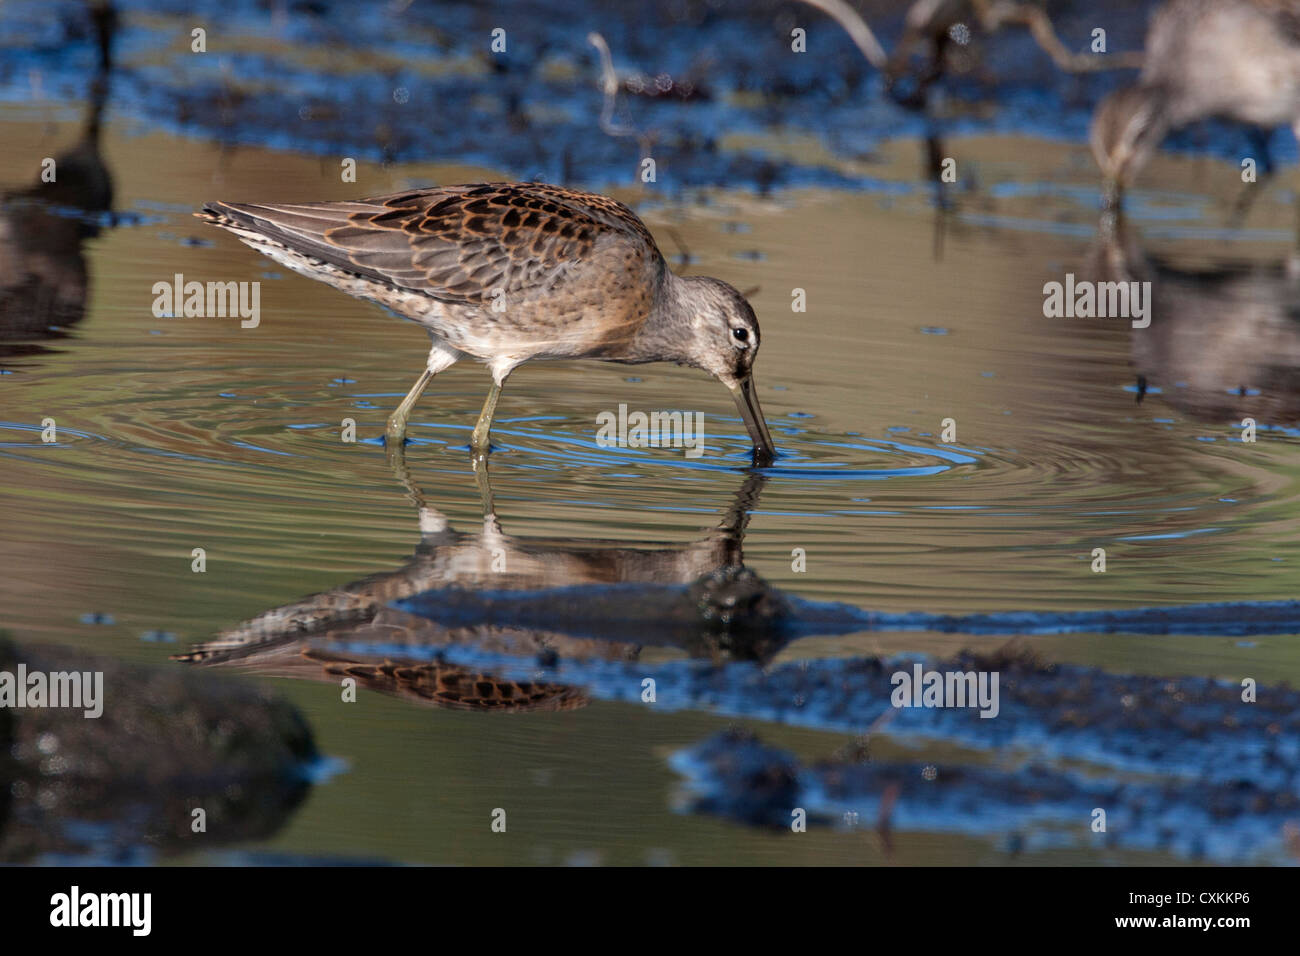 Long-billed Dowitchers Limnodromus scolopaceus feeding with reflection in water at French Creek, Vancouver Island, BC, Canada Stock Photo